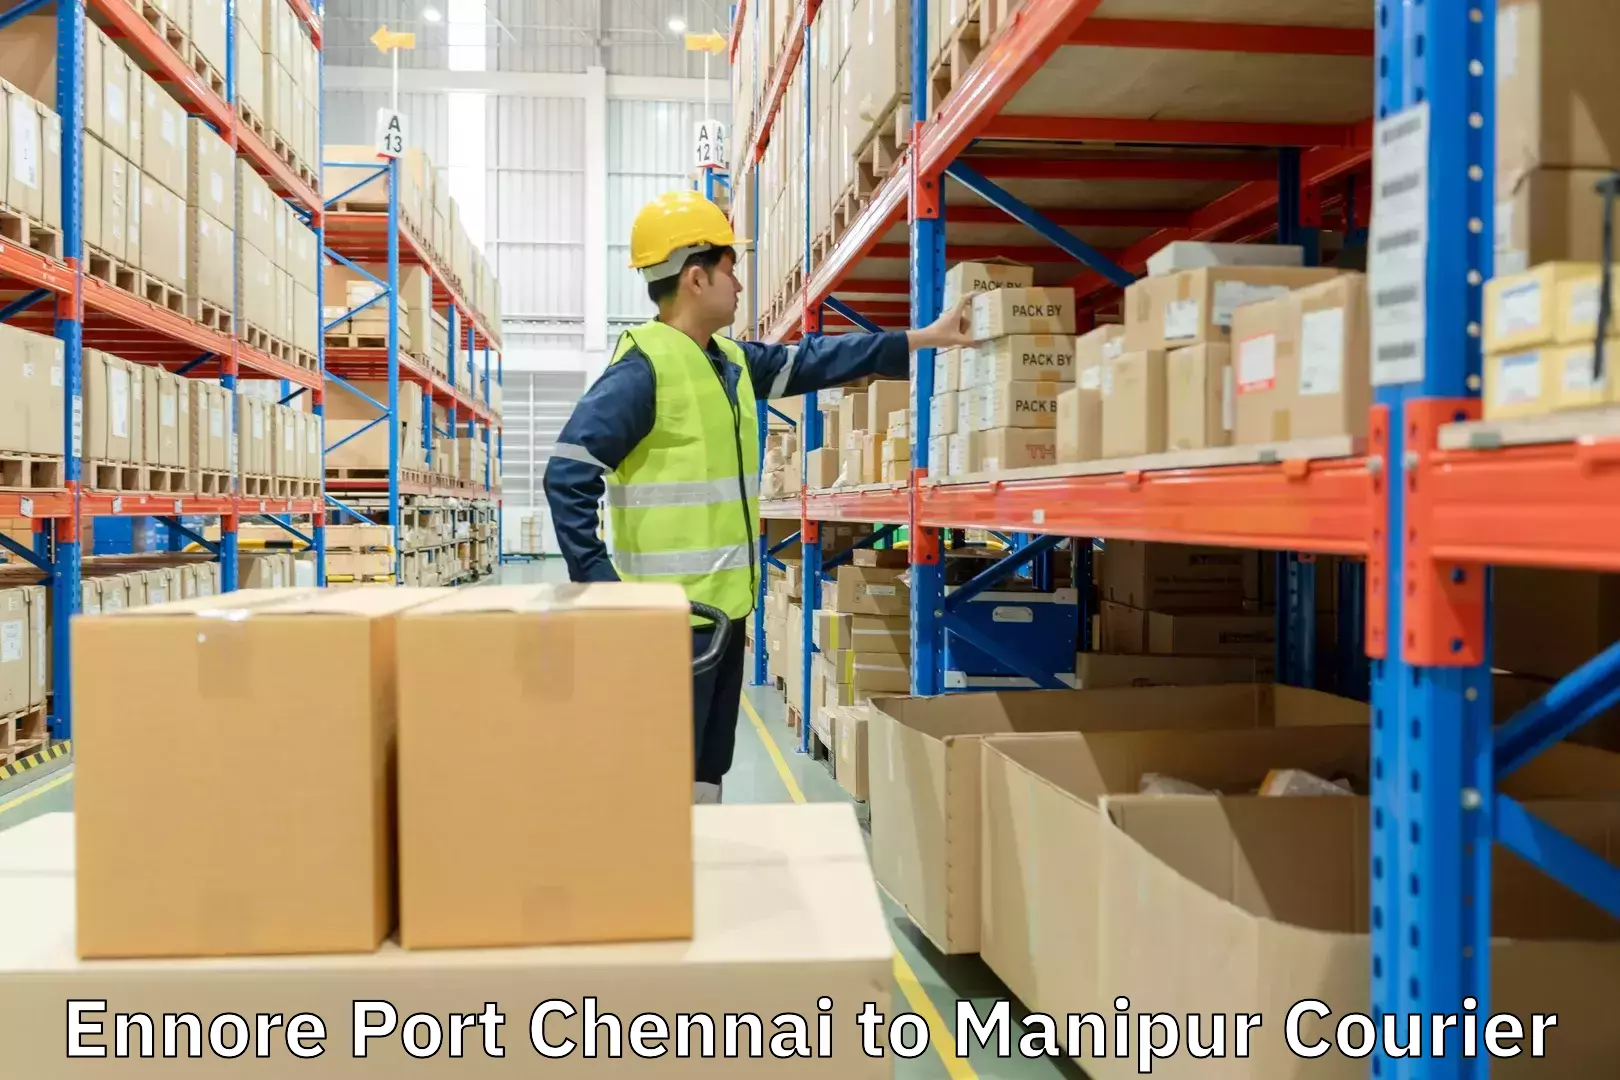 Nationwide parcel services Ennore Port Chennai to Kanti